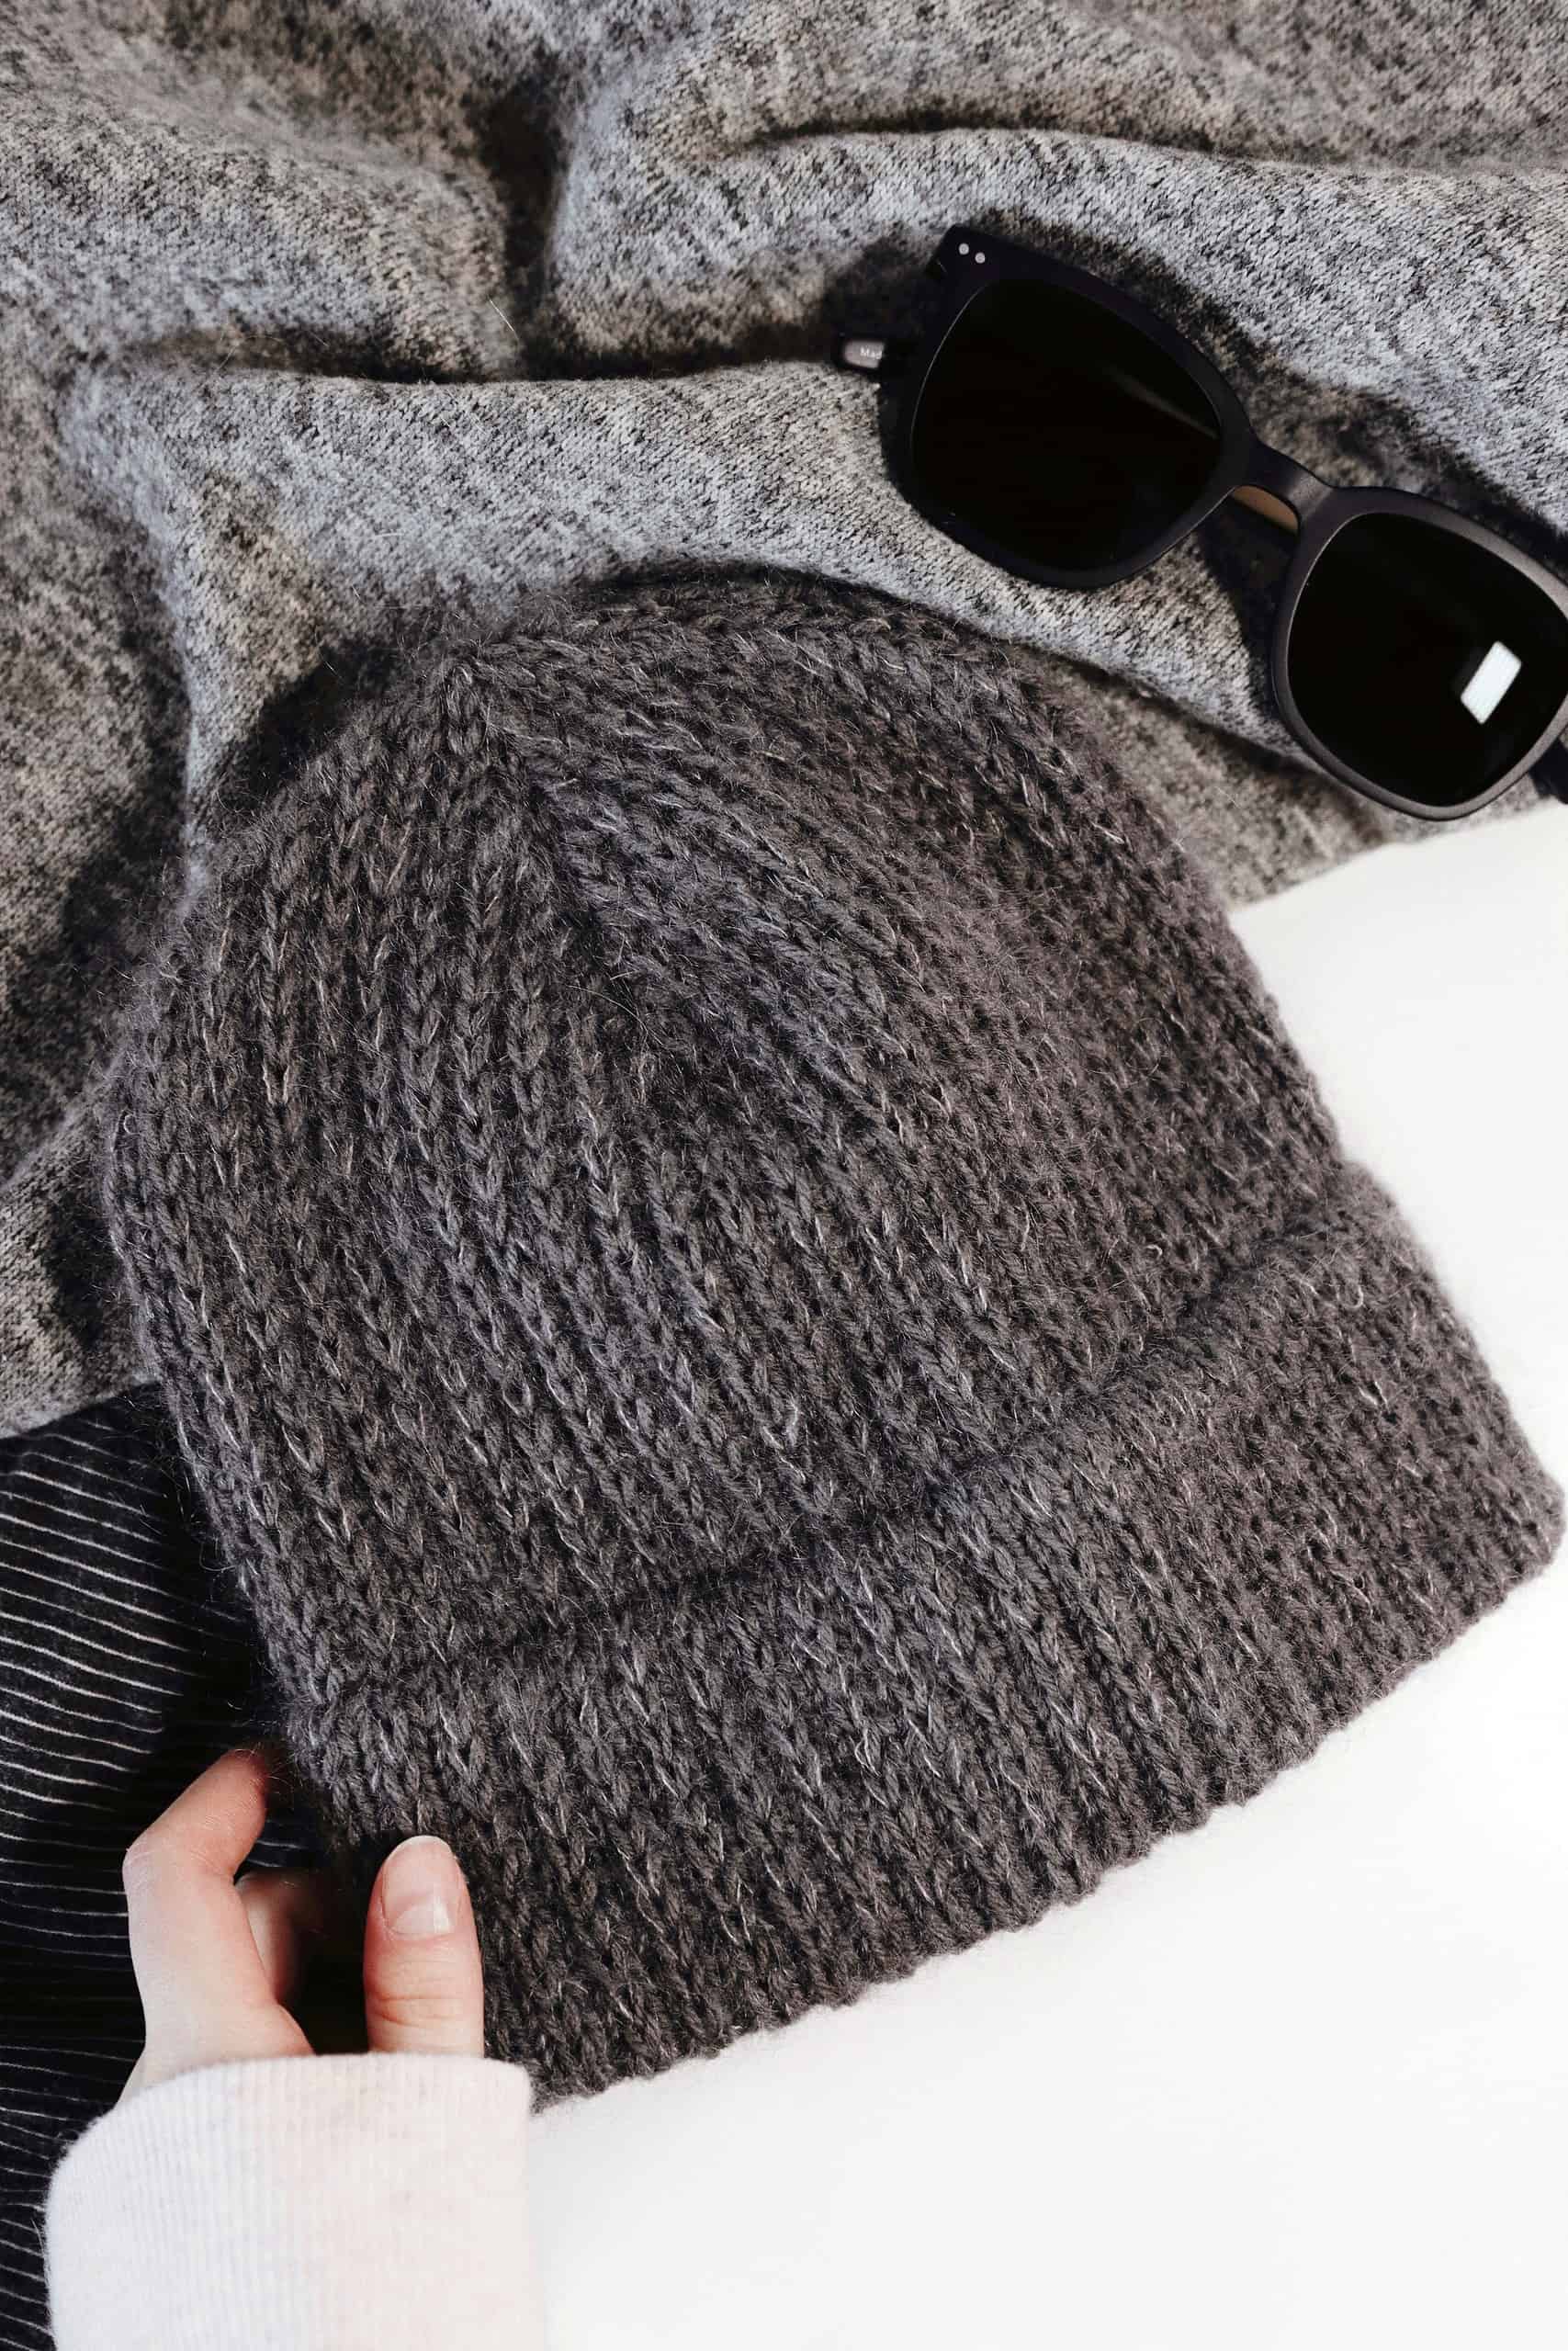 https://darlingjadore.com/wp-content/uploads/2021/04/double-knit-beanie-knitting-pattern-mens-knit-hat-scaled.jpg